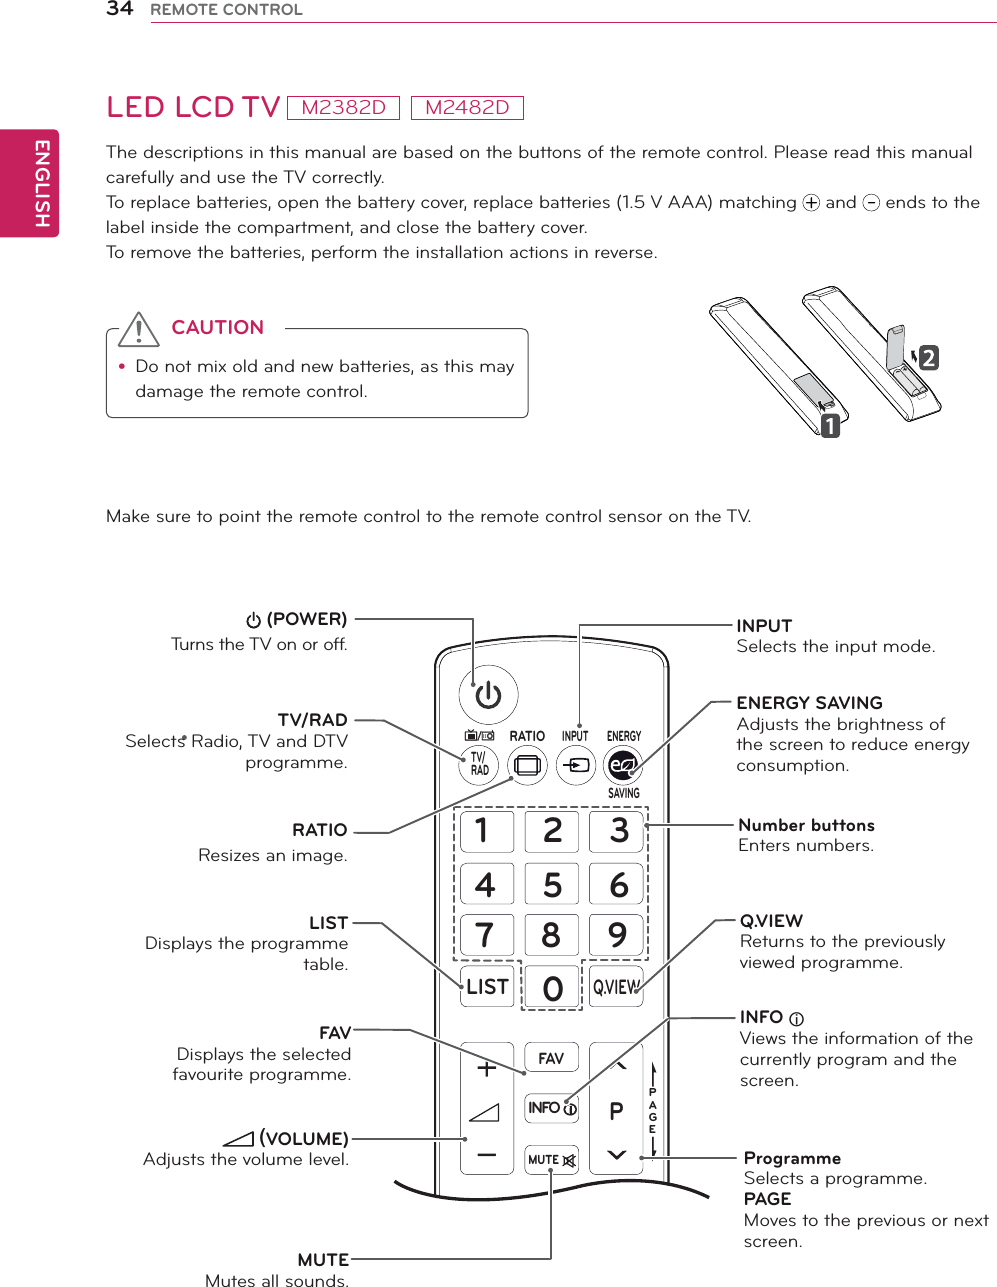 ENGLISH34 REMOTE CONTROLThe descriptions in this manual are based on the buttons of the remote control. Please read this manual carefully and use the TV correctly.To replace batteries, open the battery cover, replace batteries (1.5 V AAA) matching   and   ends to the label inside the compartment, and close the battery cover.To remove the batteries, perform the installation actions in reverse.Make sure to point the remote control to the remote control sensor on the TV.CAUTIONy Do not mix old and new batteries, as this may damage the remote control.1234506789LISTQ.VIEWSETTINGSGUIDEQ.MENUPAGEPFAVMUTEINFORATIOINPUTTV/RADENERGYSAVING (POWER)Turns the TV on or off.LISTDisplays the programme table.INPUTSelects the input mode.TV/RADSelects Radio, TV and DTV programme.Number buttonsEnters numbers.Q.VIEWReturns to the previously viewed programme. FAVDisplays the selected favourite programme.INFO ۘViews the information of the currently program and the screen.RATIOResizes an image.Programme Selects a programme.PAGE Moves to the previous or next screen.MUTEMutes all sounds.ENERGY SAVINGAdjusts the brightness of the screen to reduce energy consumption. VOLUME)Adjusts the volume level.LED LCD TV M2382D M2482D